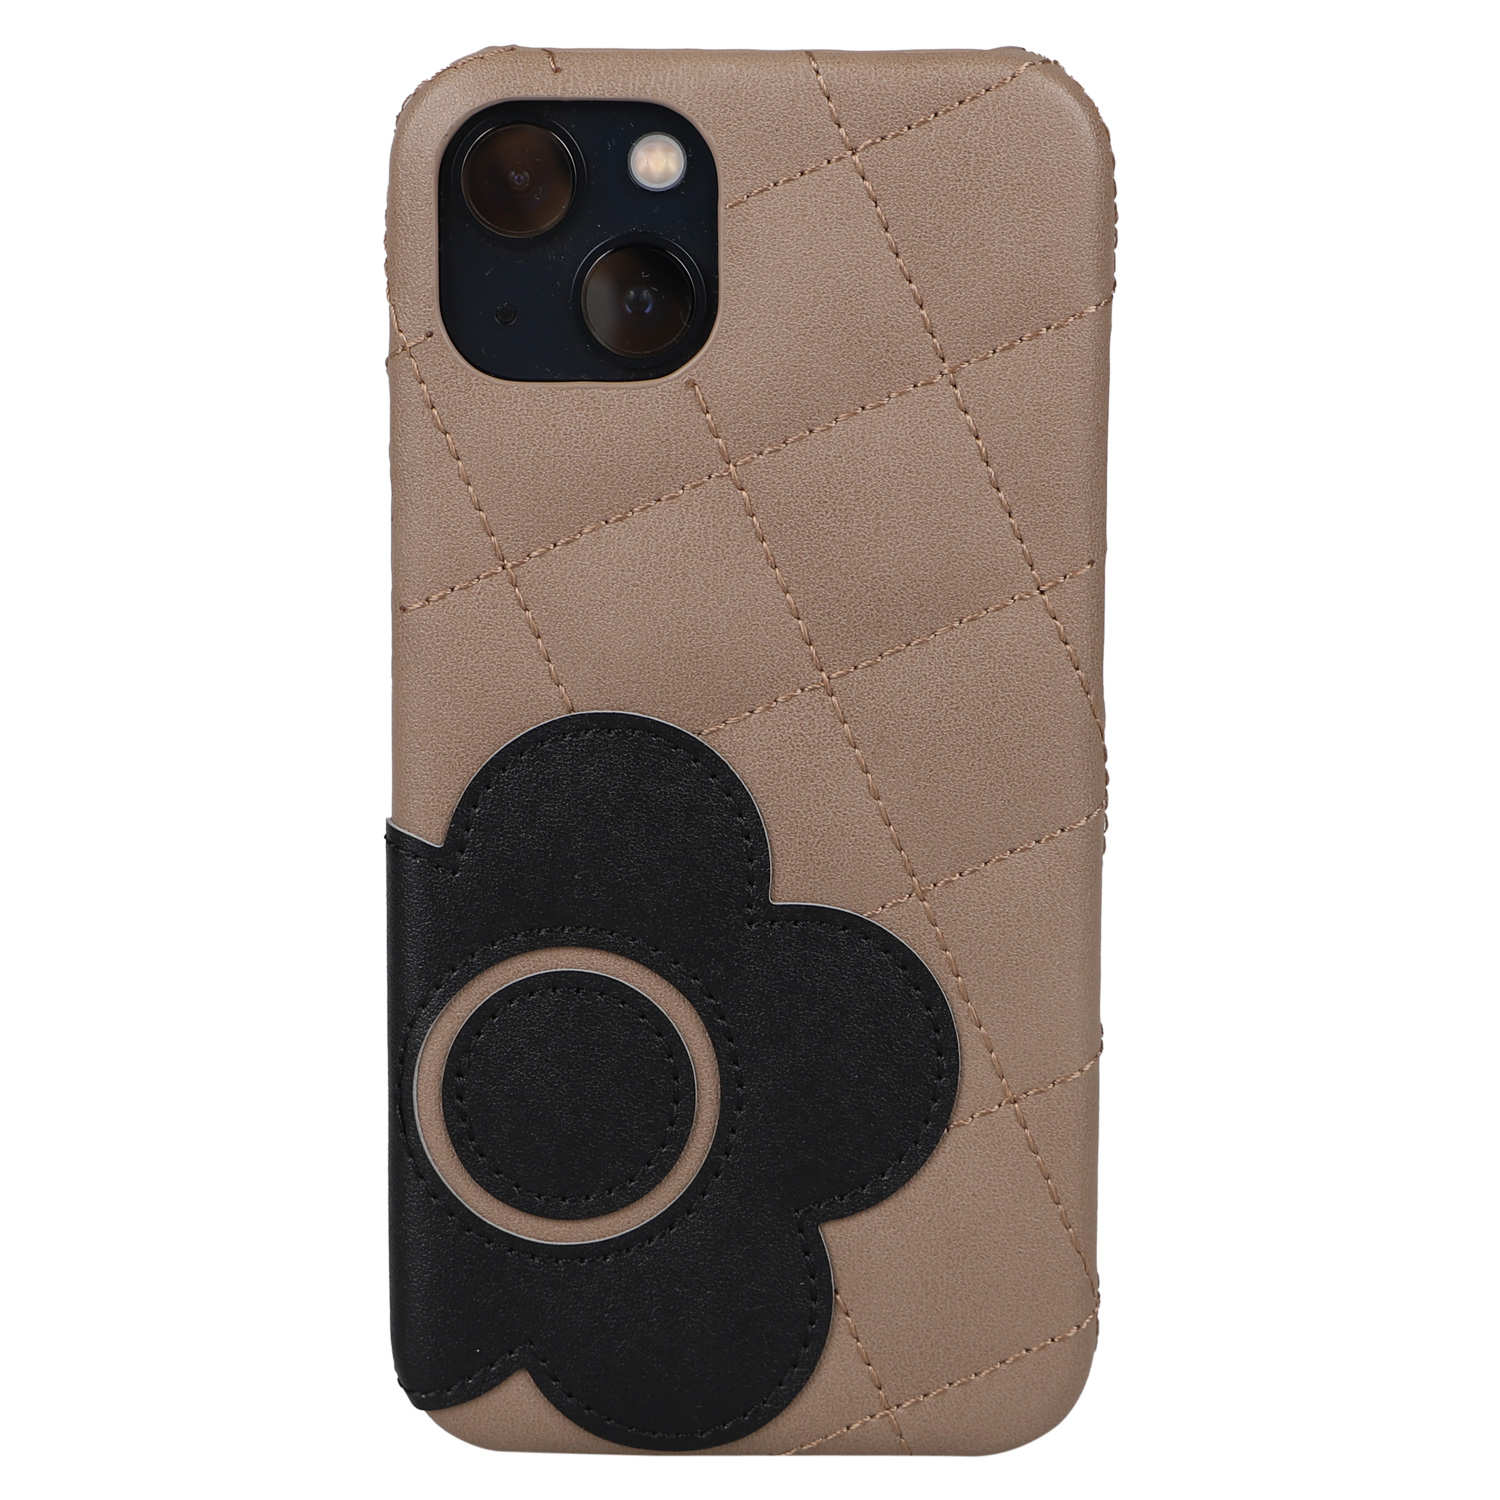 MARY QUANT マリークヮント iPhone 13 ケース スマホ 携帯 レディース マリクワ PU QUILT LEATHER BACK CASE IP13-MQ03｜sneak｜04